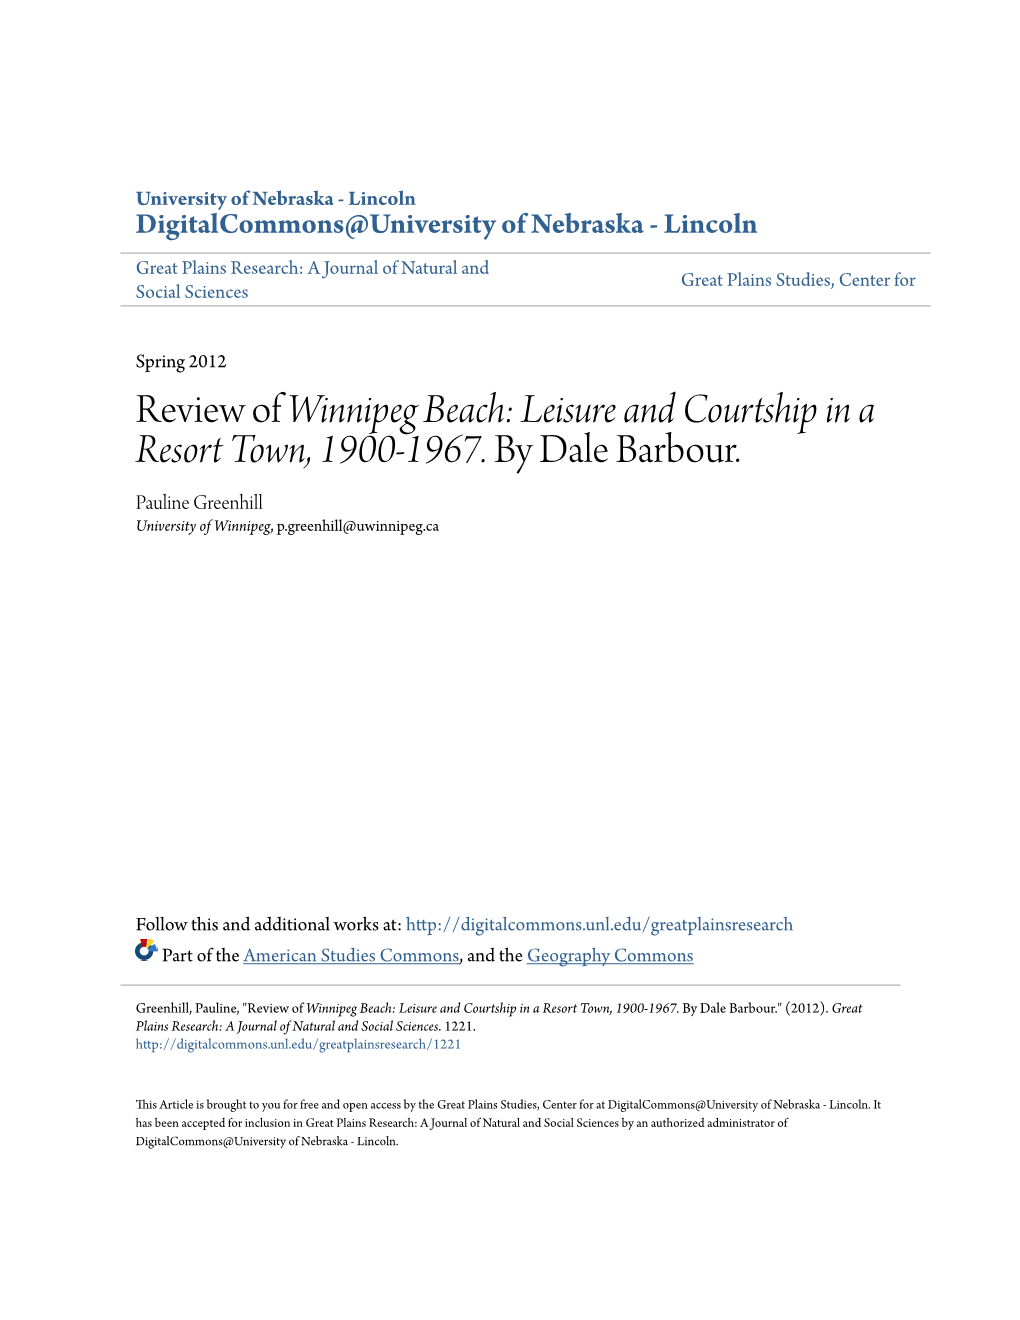 Review of Winnipeg Beach: Leisure and Courtship in a Resort Town, 1900-1967